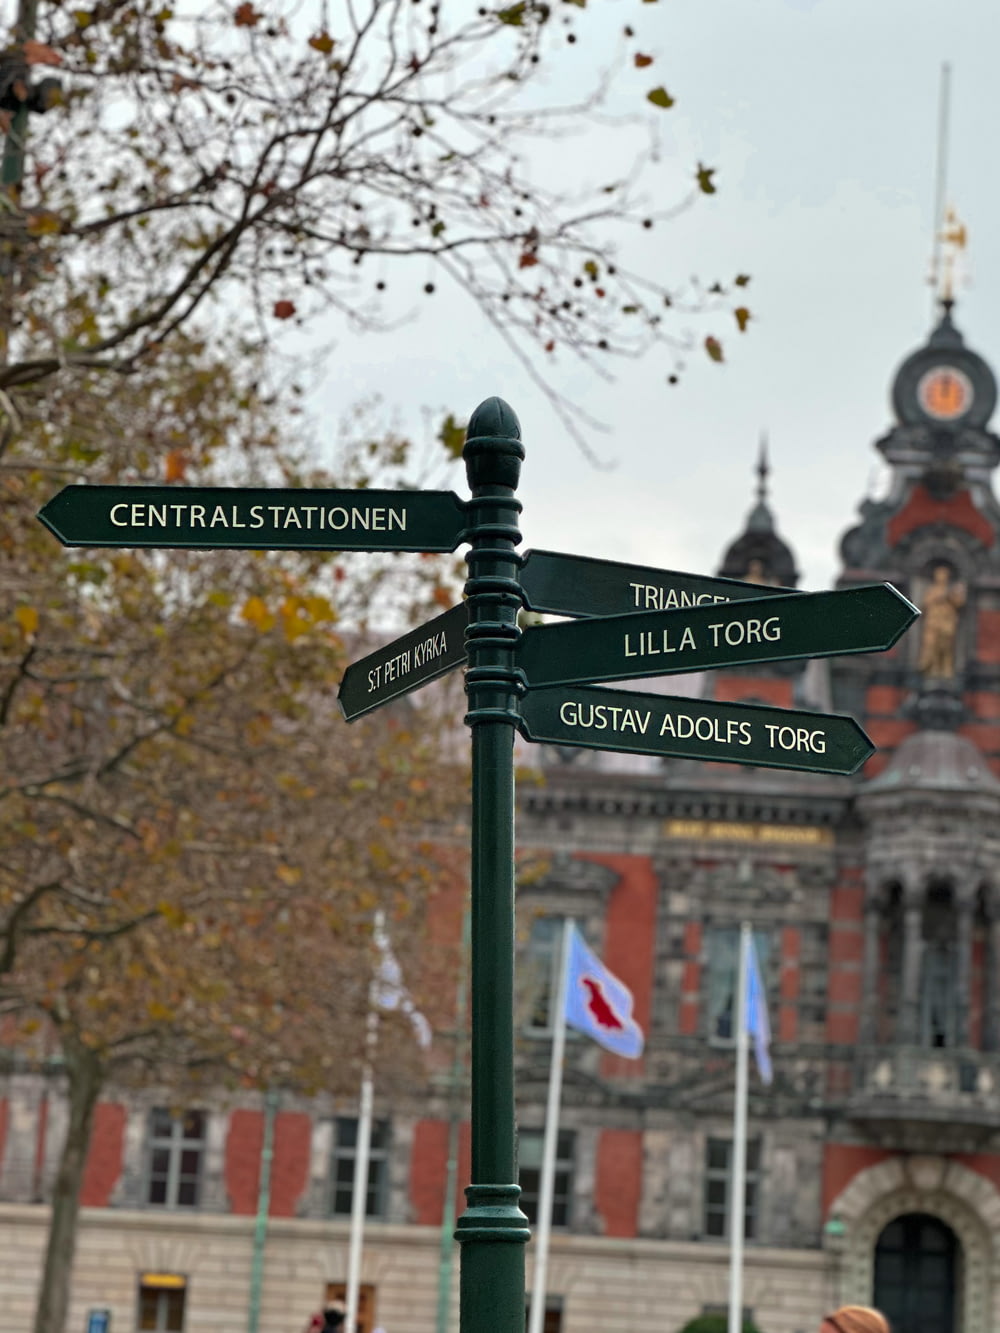 a street sign with a clock tower in the background